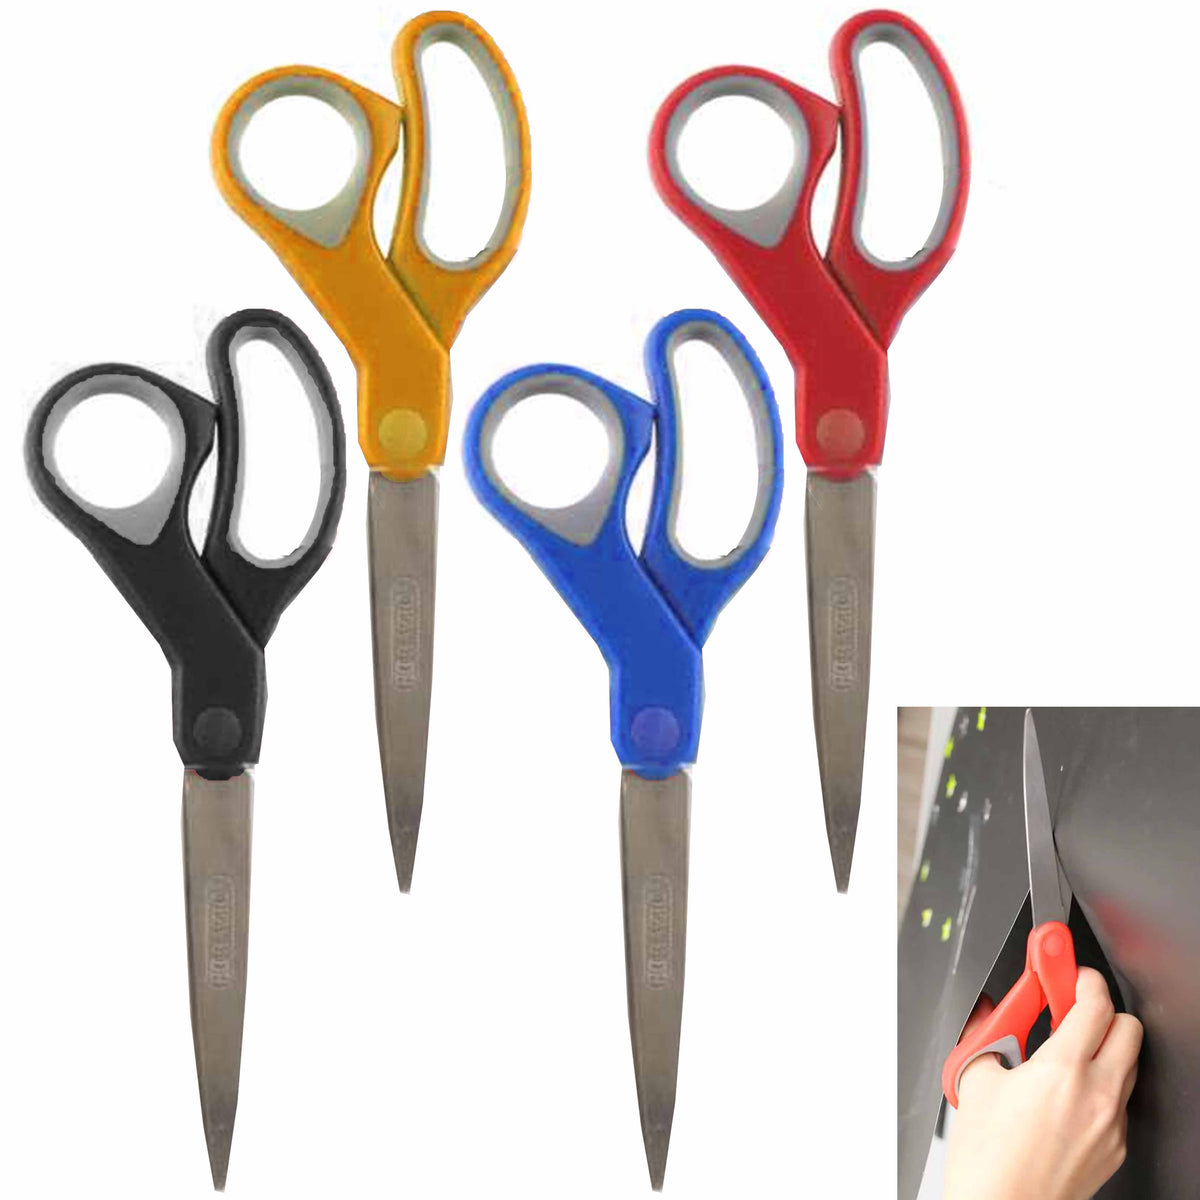 7.5 Stainless Steel Good Quality Scissors For Crafts Sewing School Sharp  Blade